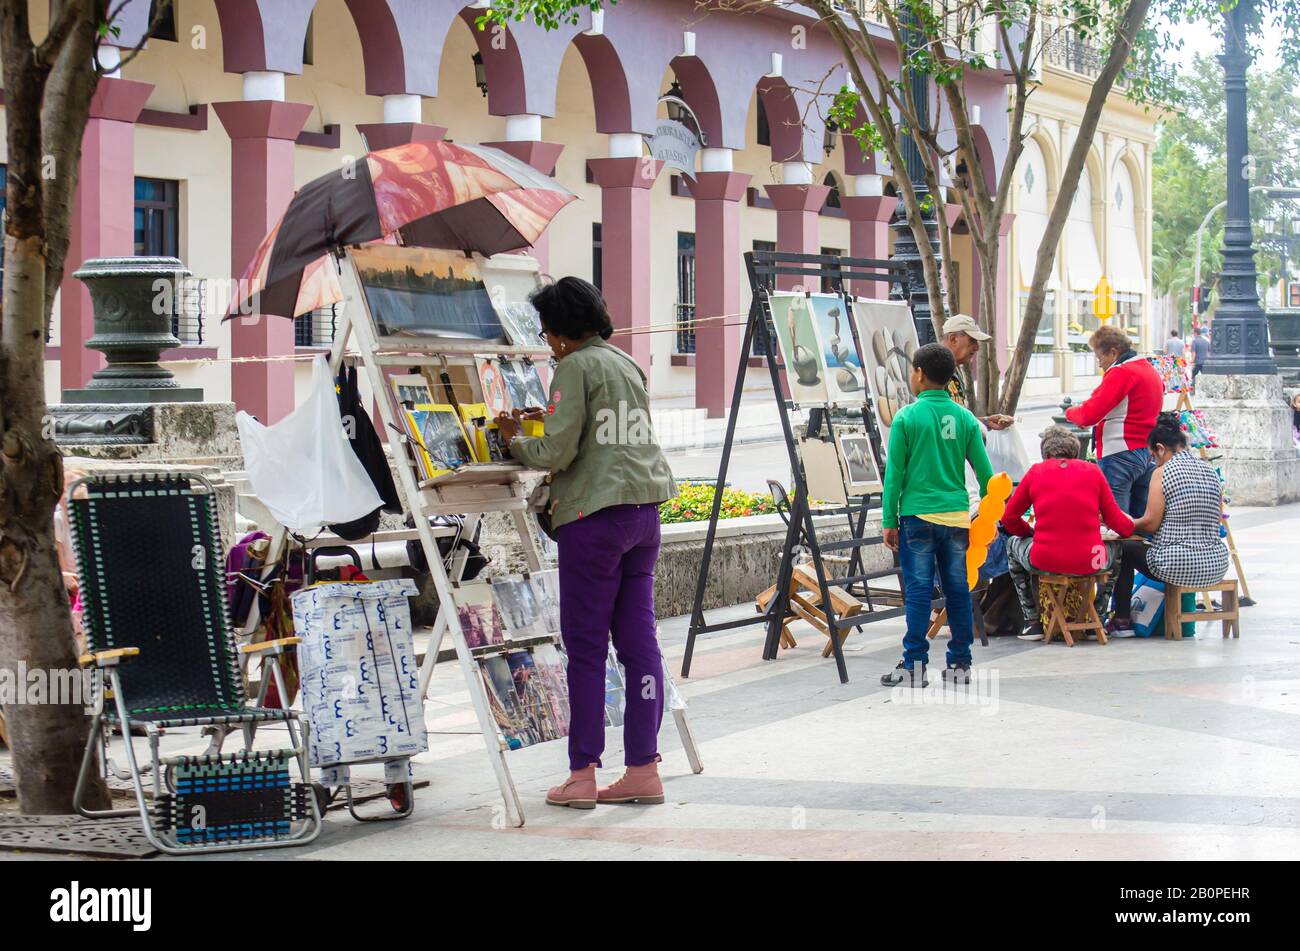 Art Market in Paseo de Marti or Paseo Del Prado in Old Havana on Sunday.  Artist sell their paintings and crafts on weekends Stock Photo